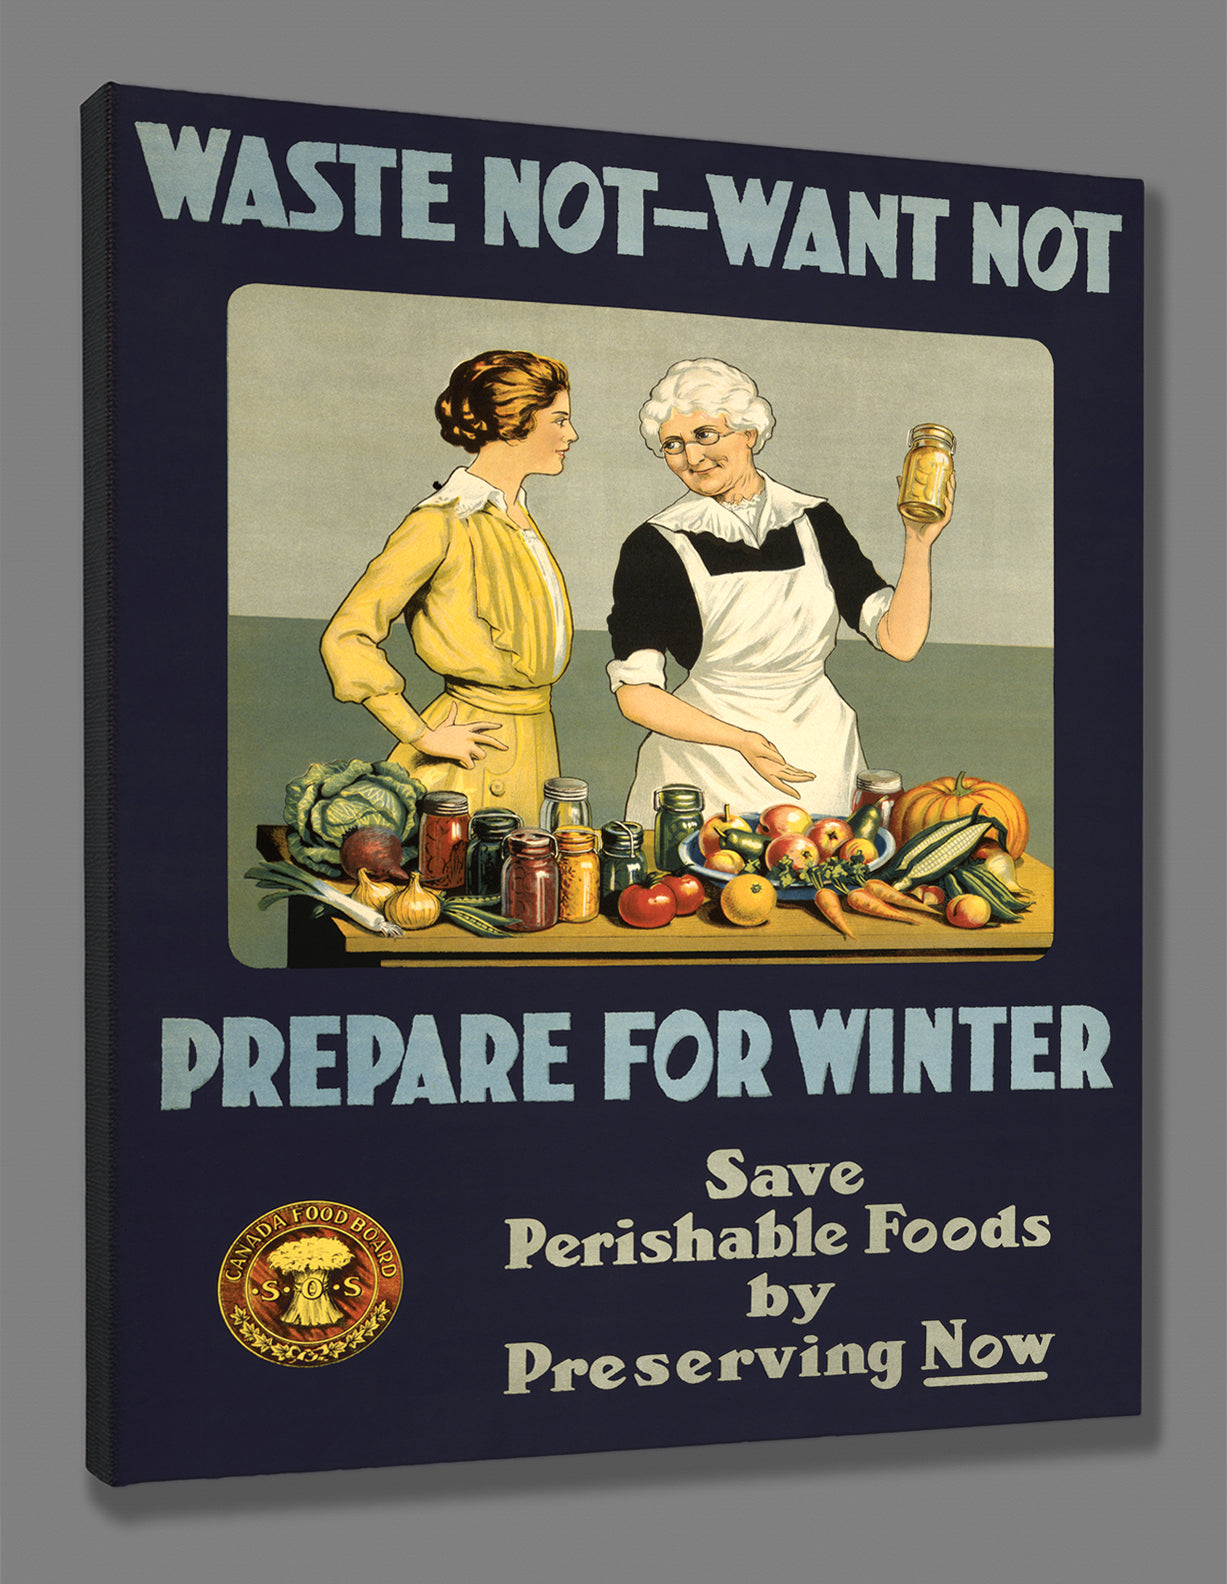 A stretched canvas print of a vintage poster featuring two woman preserving perishable foods